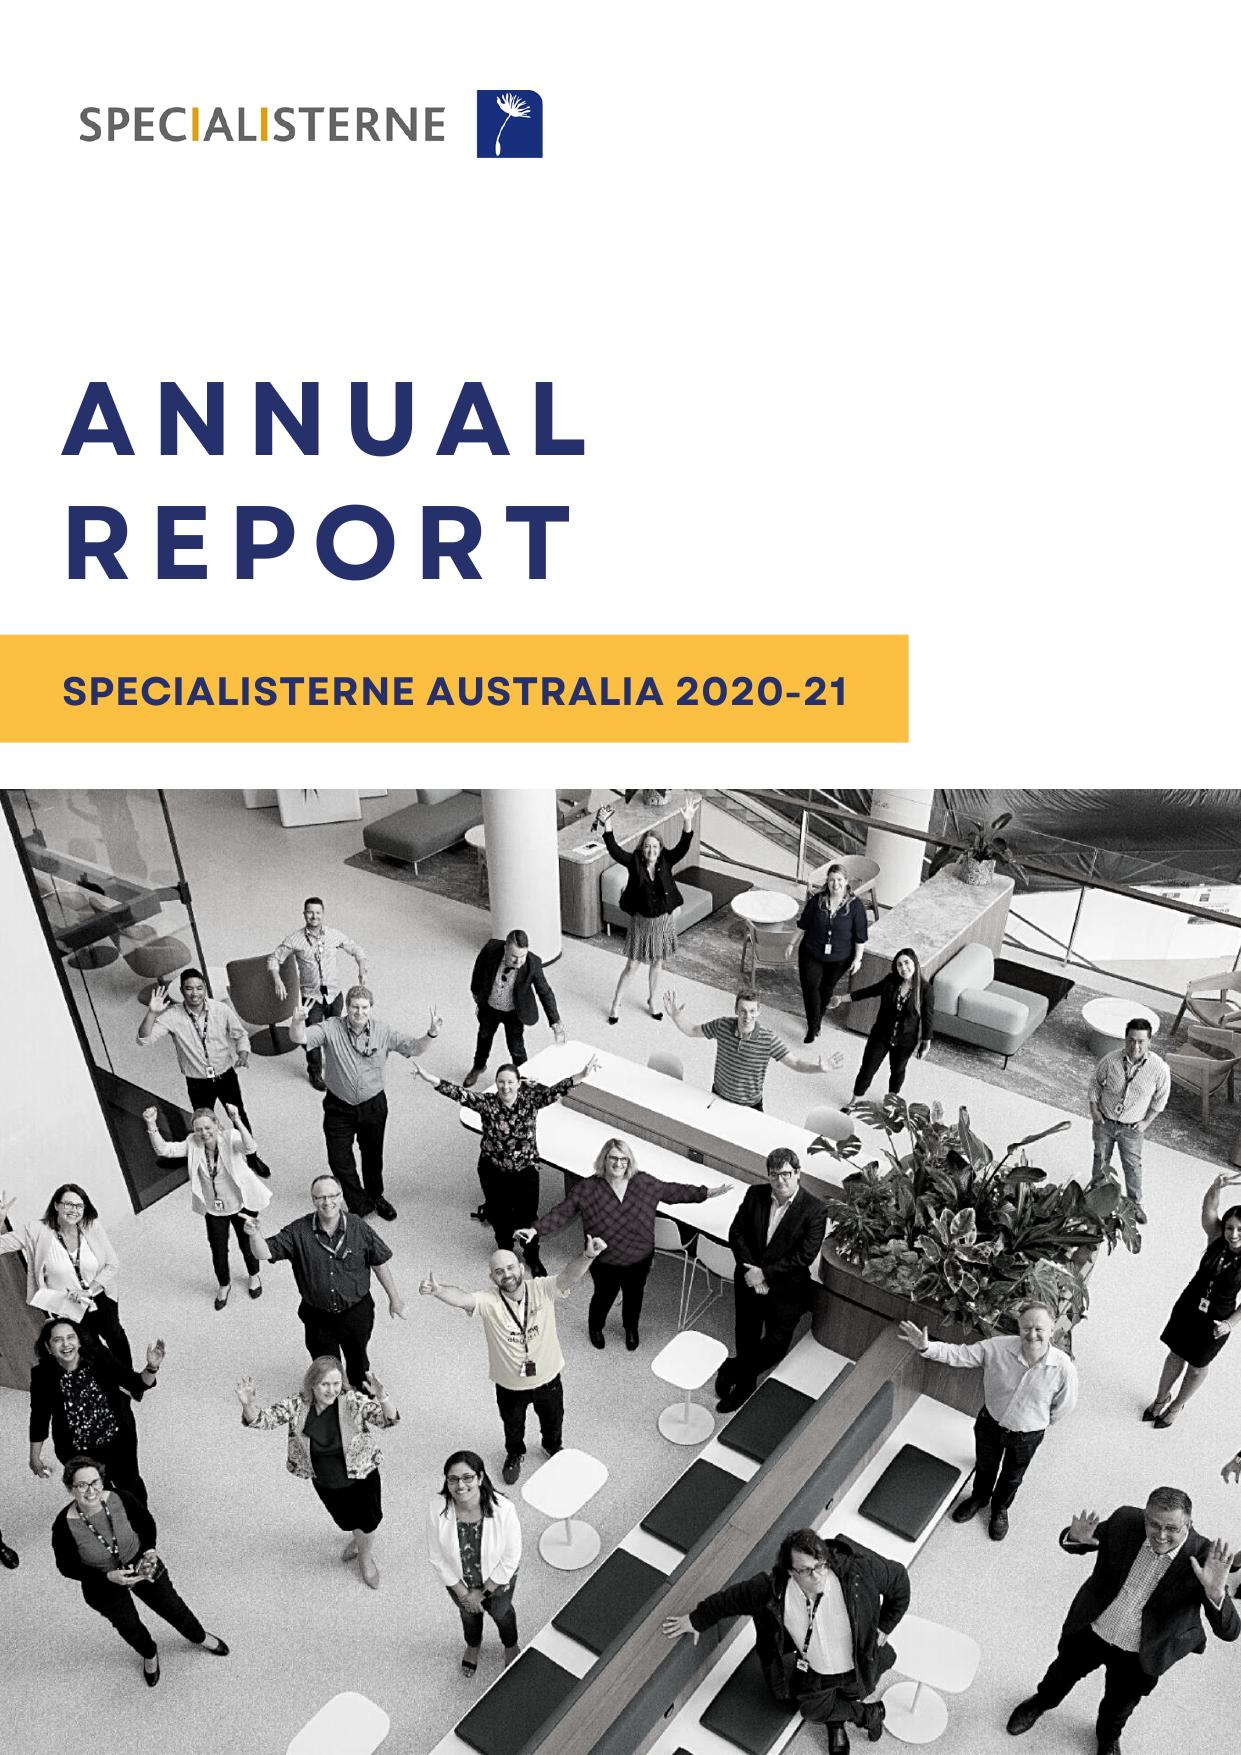 SPECIALISTERNE 2021 Annual Report